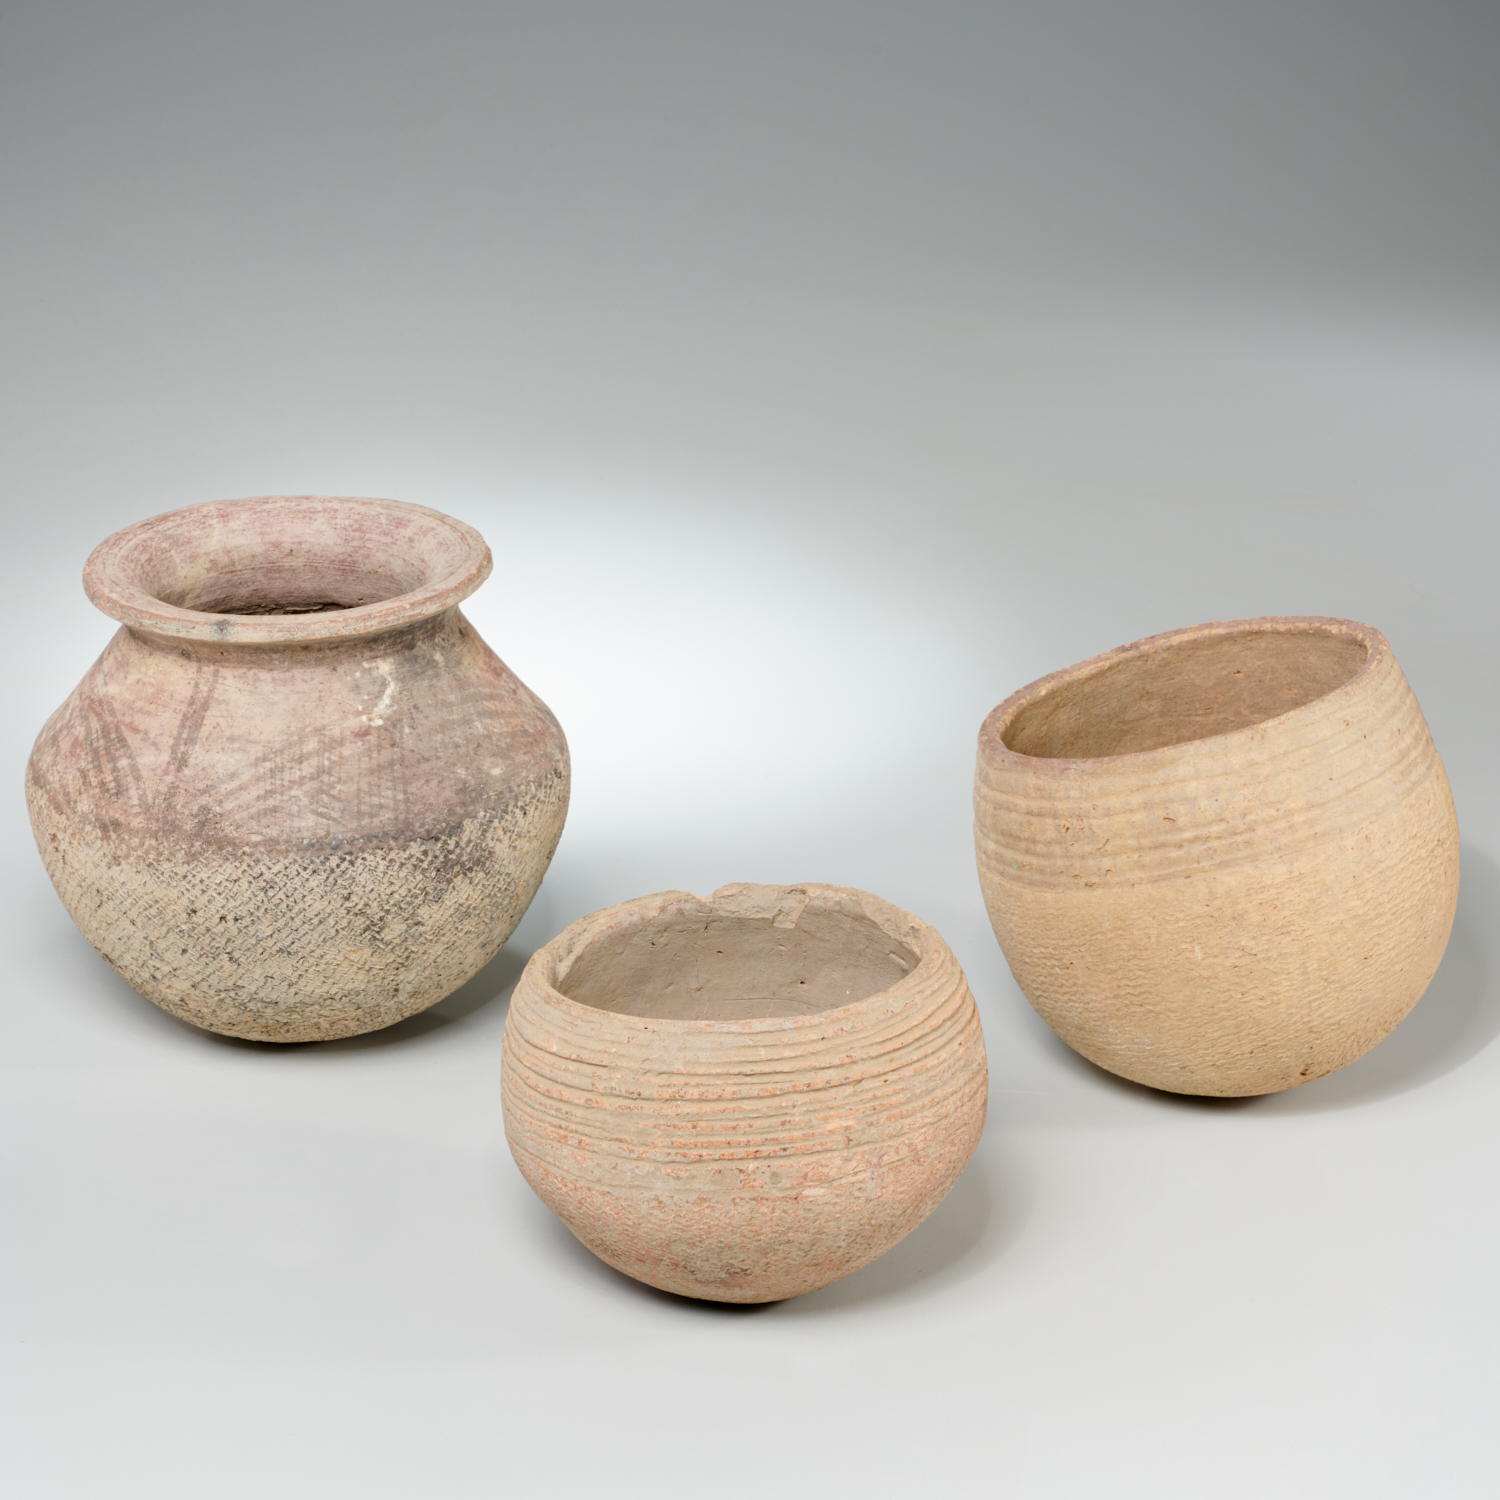  3 CHINESE NEOLITHIC POTTERY VESSELS 3611f1